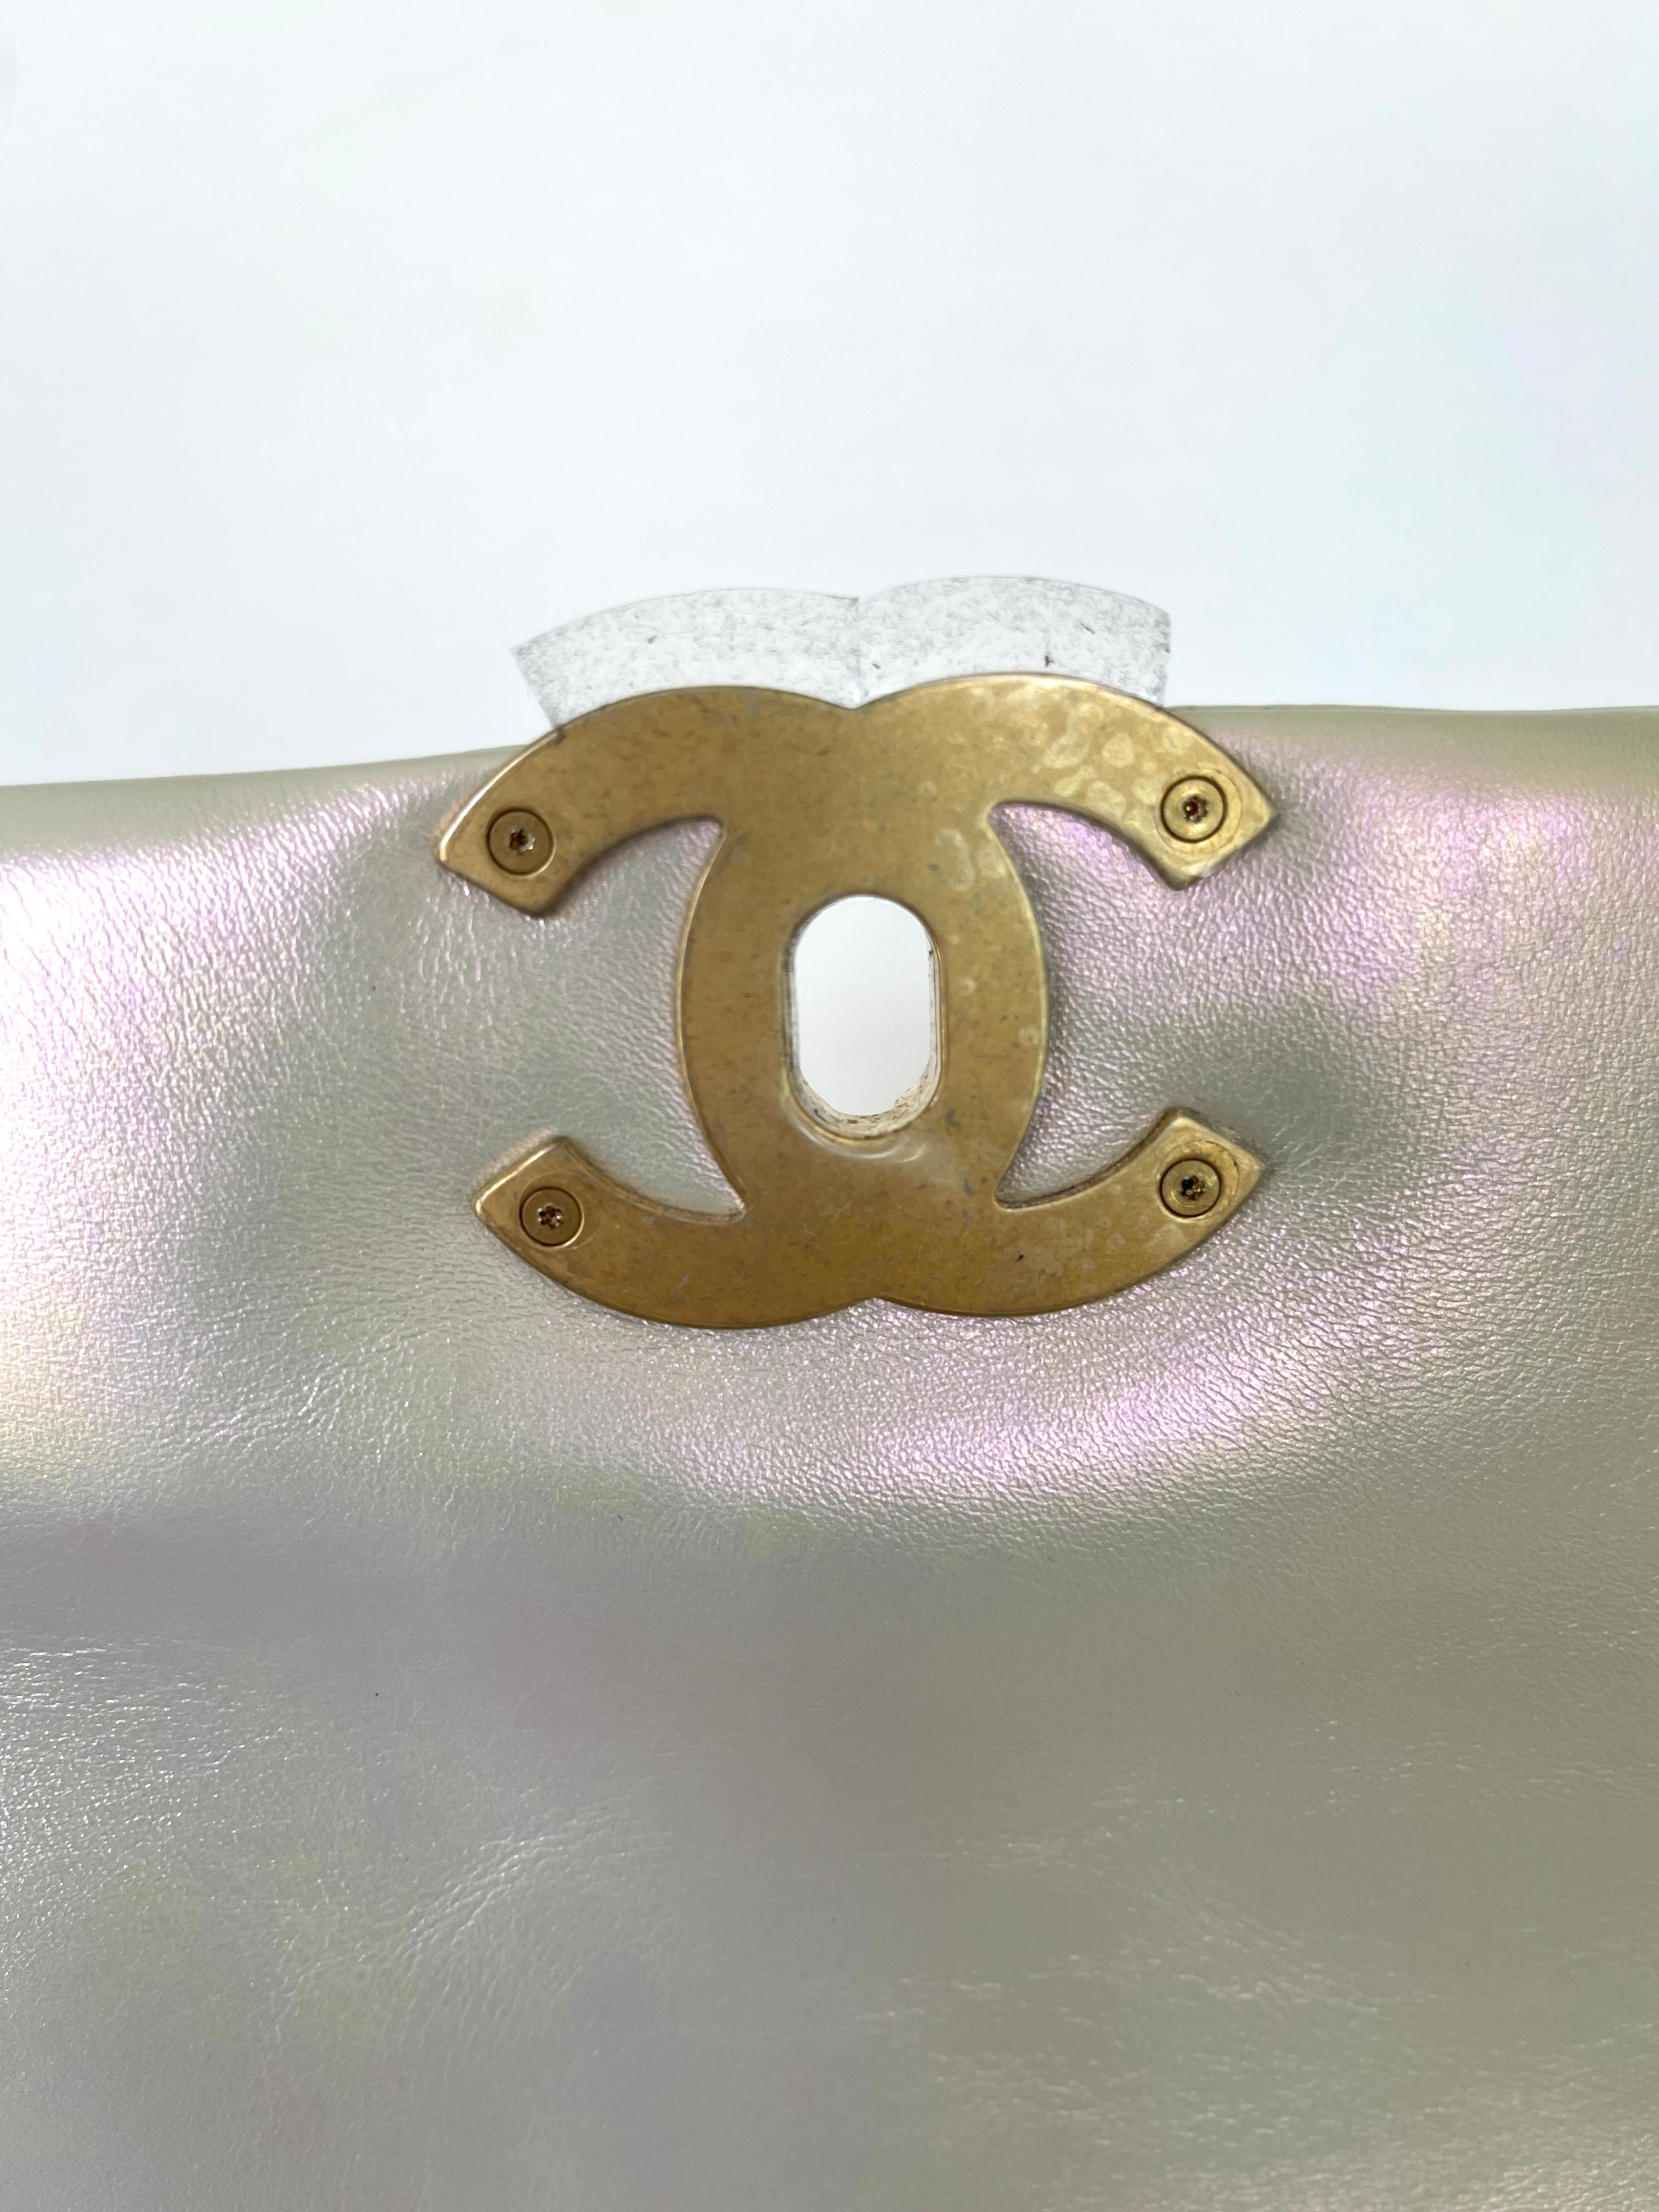 19 Bag
Size is small ( although it is not a small bag)
Stunning and Soldout
We had to preorder this 6 months ago from Chanel
The color is 21P  an iridescent white Goatskin, that reflects color around it
Gold and Ruthenium makes it so special,